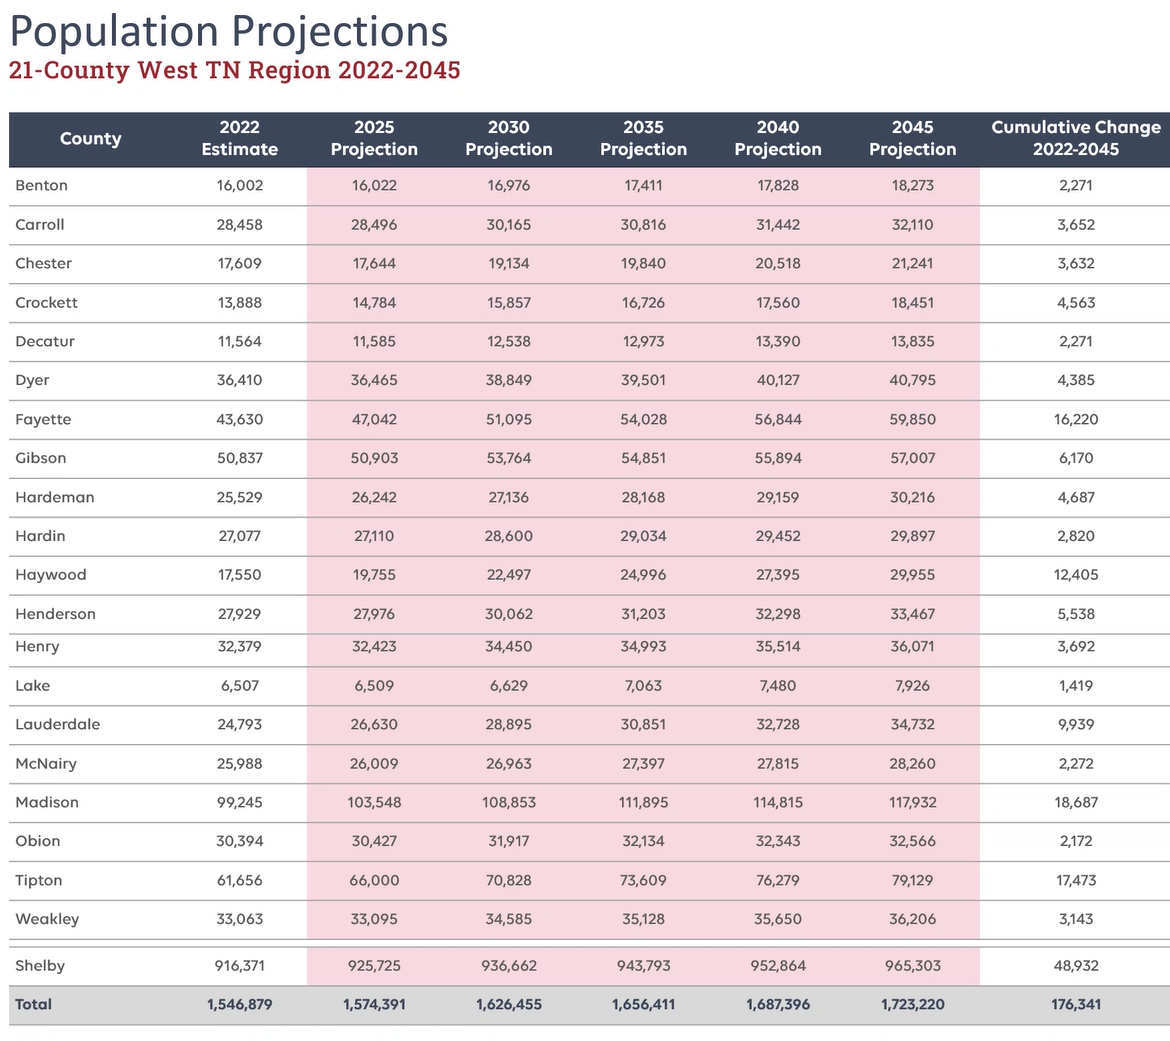 Population projections